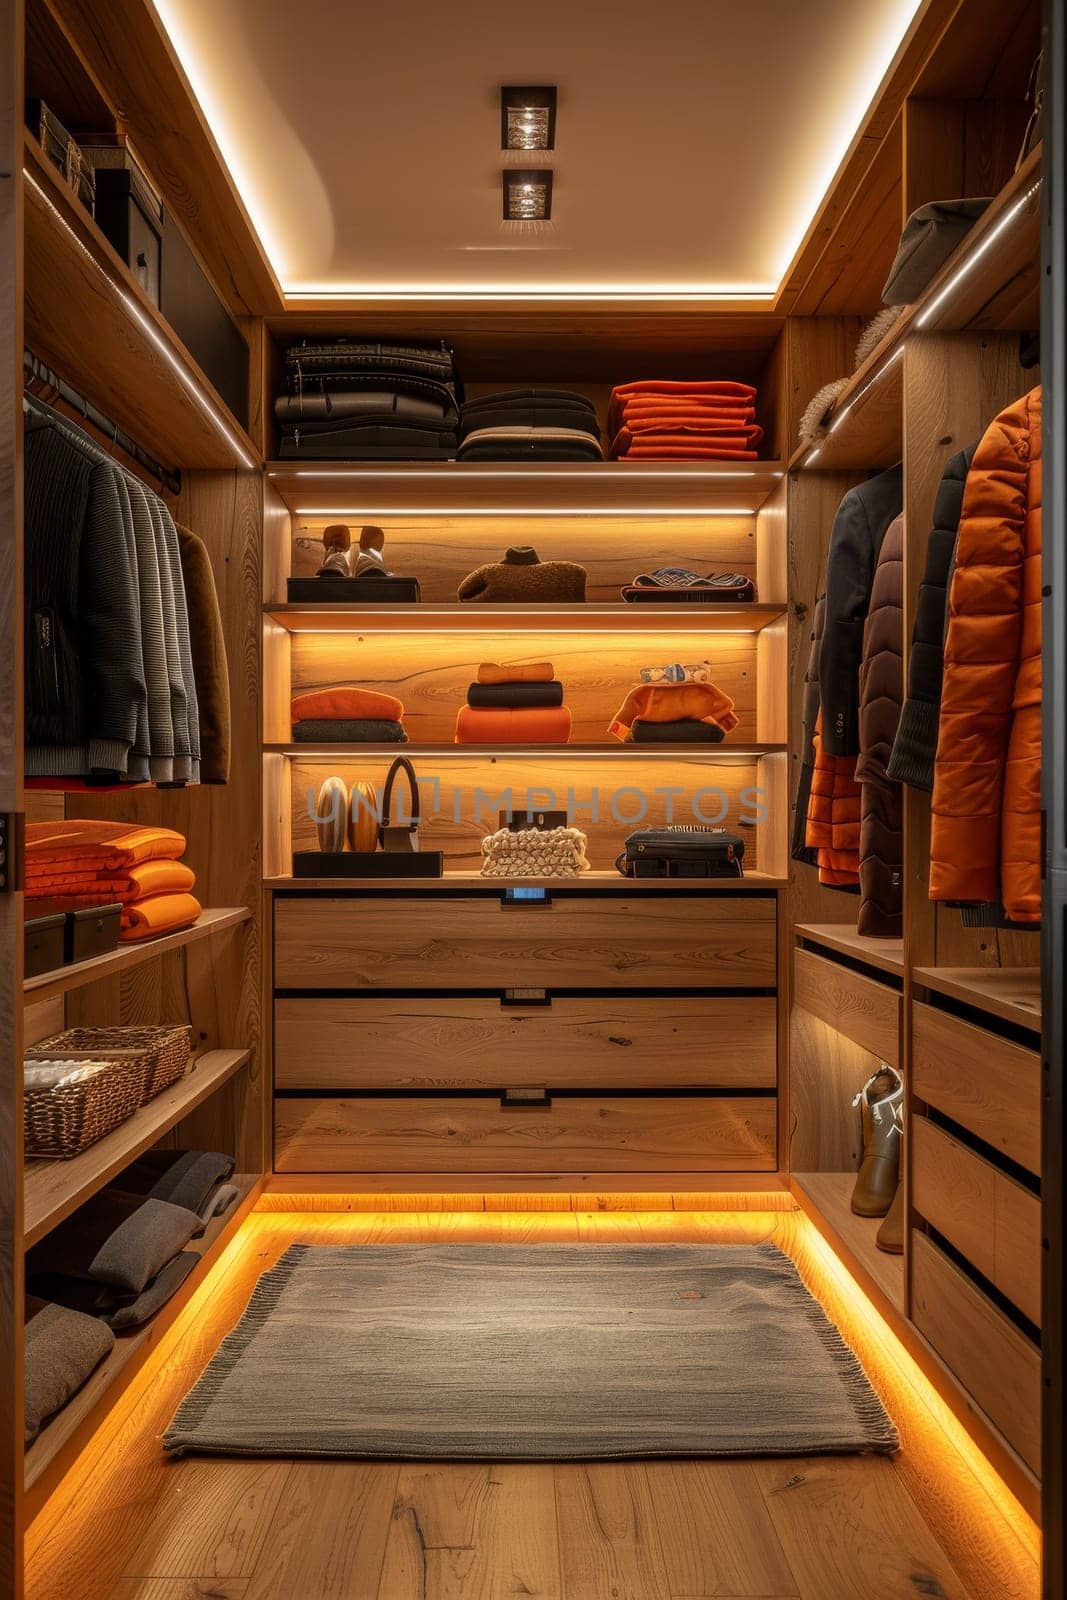 A small, dimly lit walk-in closet with a rug on the floor. The closet is filled with clothes and accessories, including a handbag and a bottle. The lighting creates a cozy and intimate atmosphere